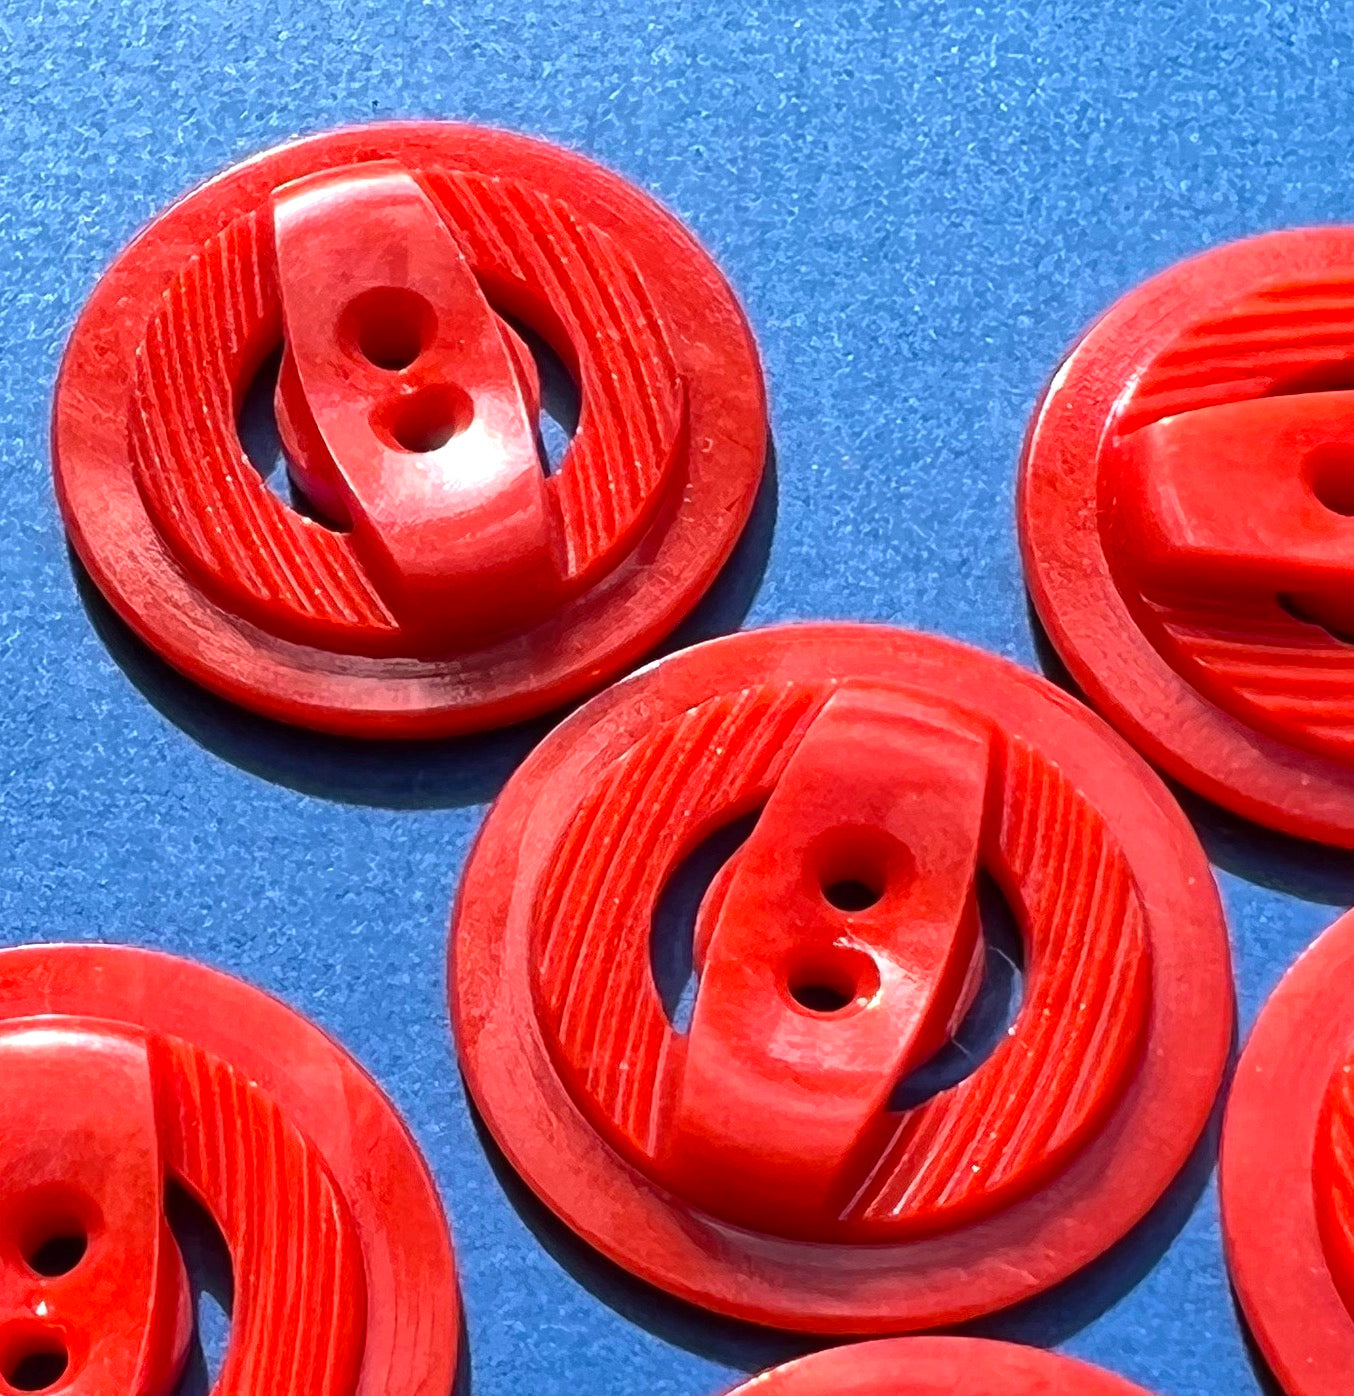 6 Very Deco Red 1940s  Buttons - 2.2cm